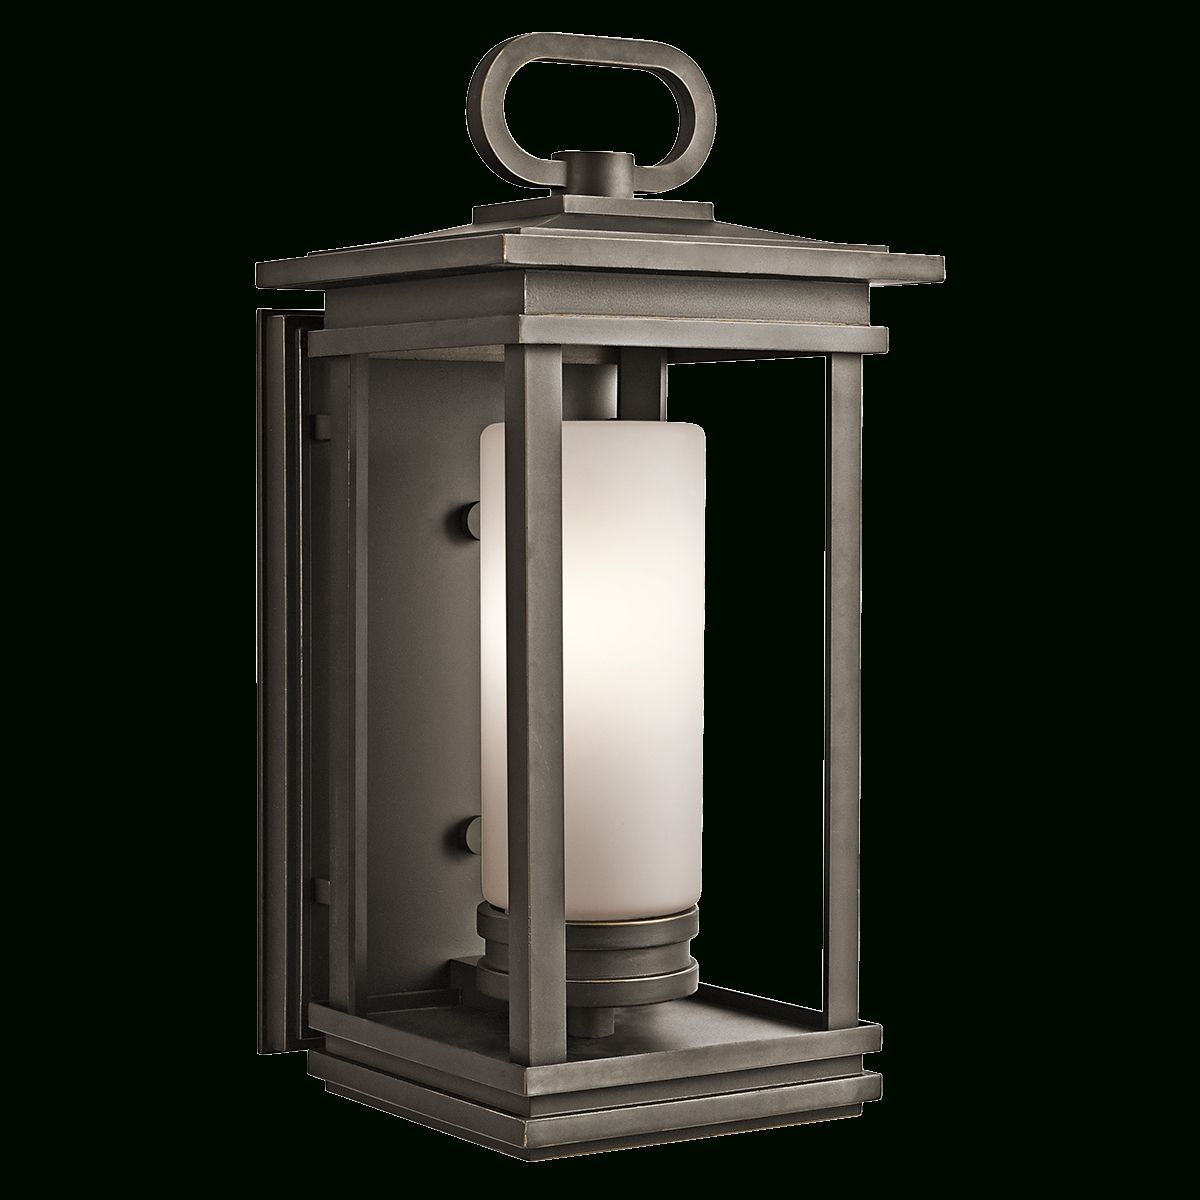 Kichler Outdoor Lighting – Pixball Intended For Kichler Outdoor Lanterns (View 10 of 20)